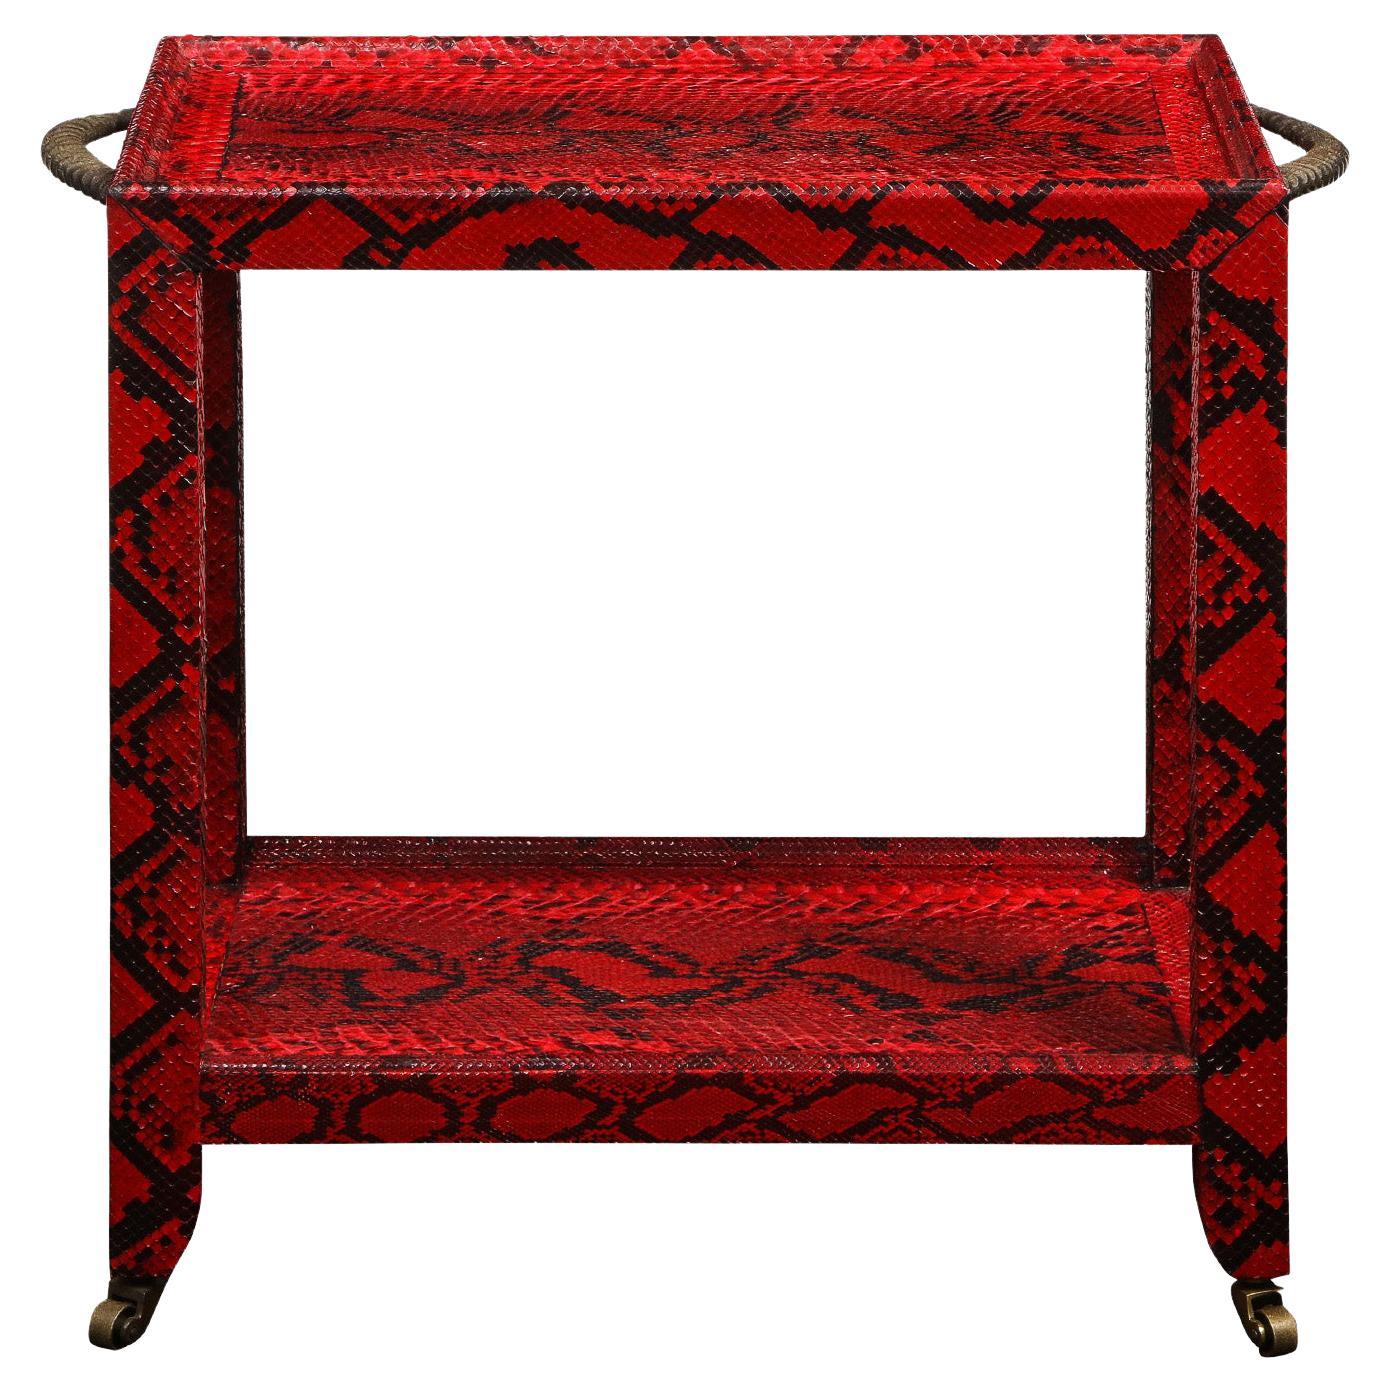 Karl Springer 2-Tier Side Table in Red Python with Horn Handles 1977, 'Signed'